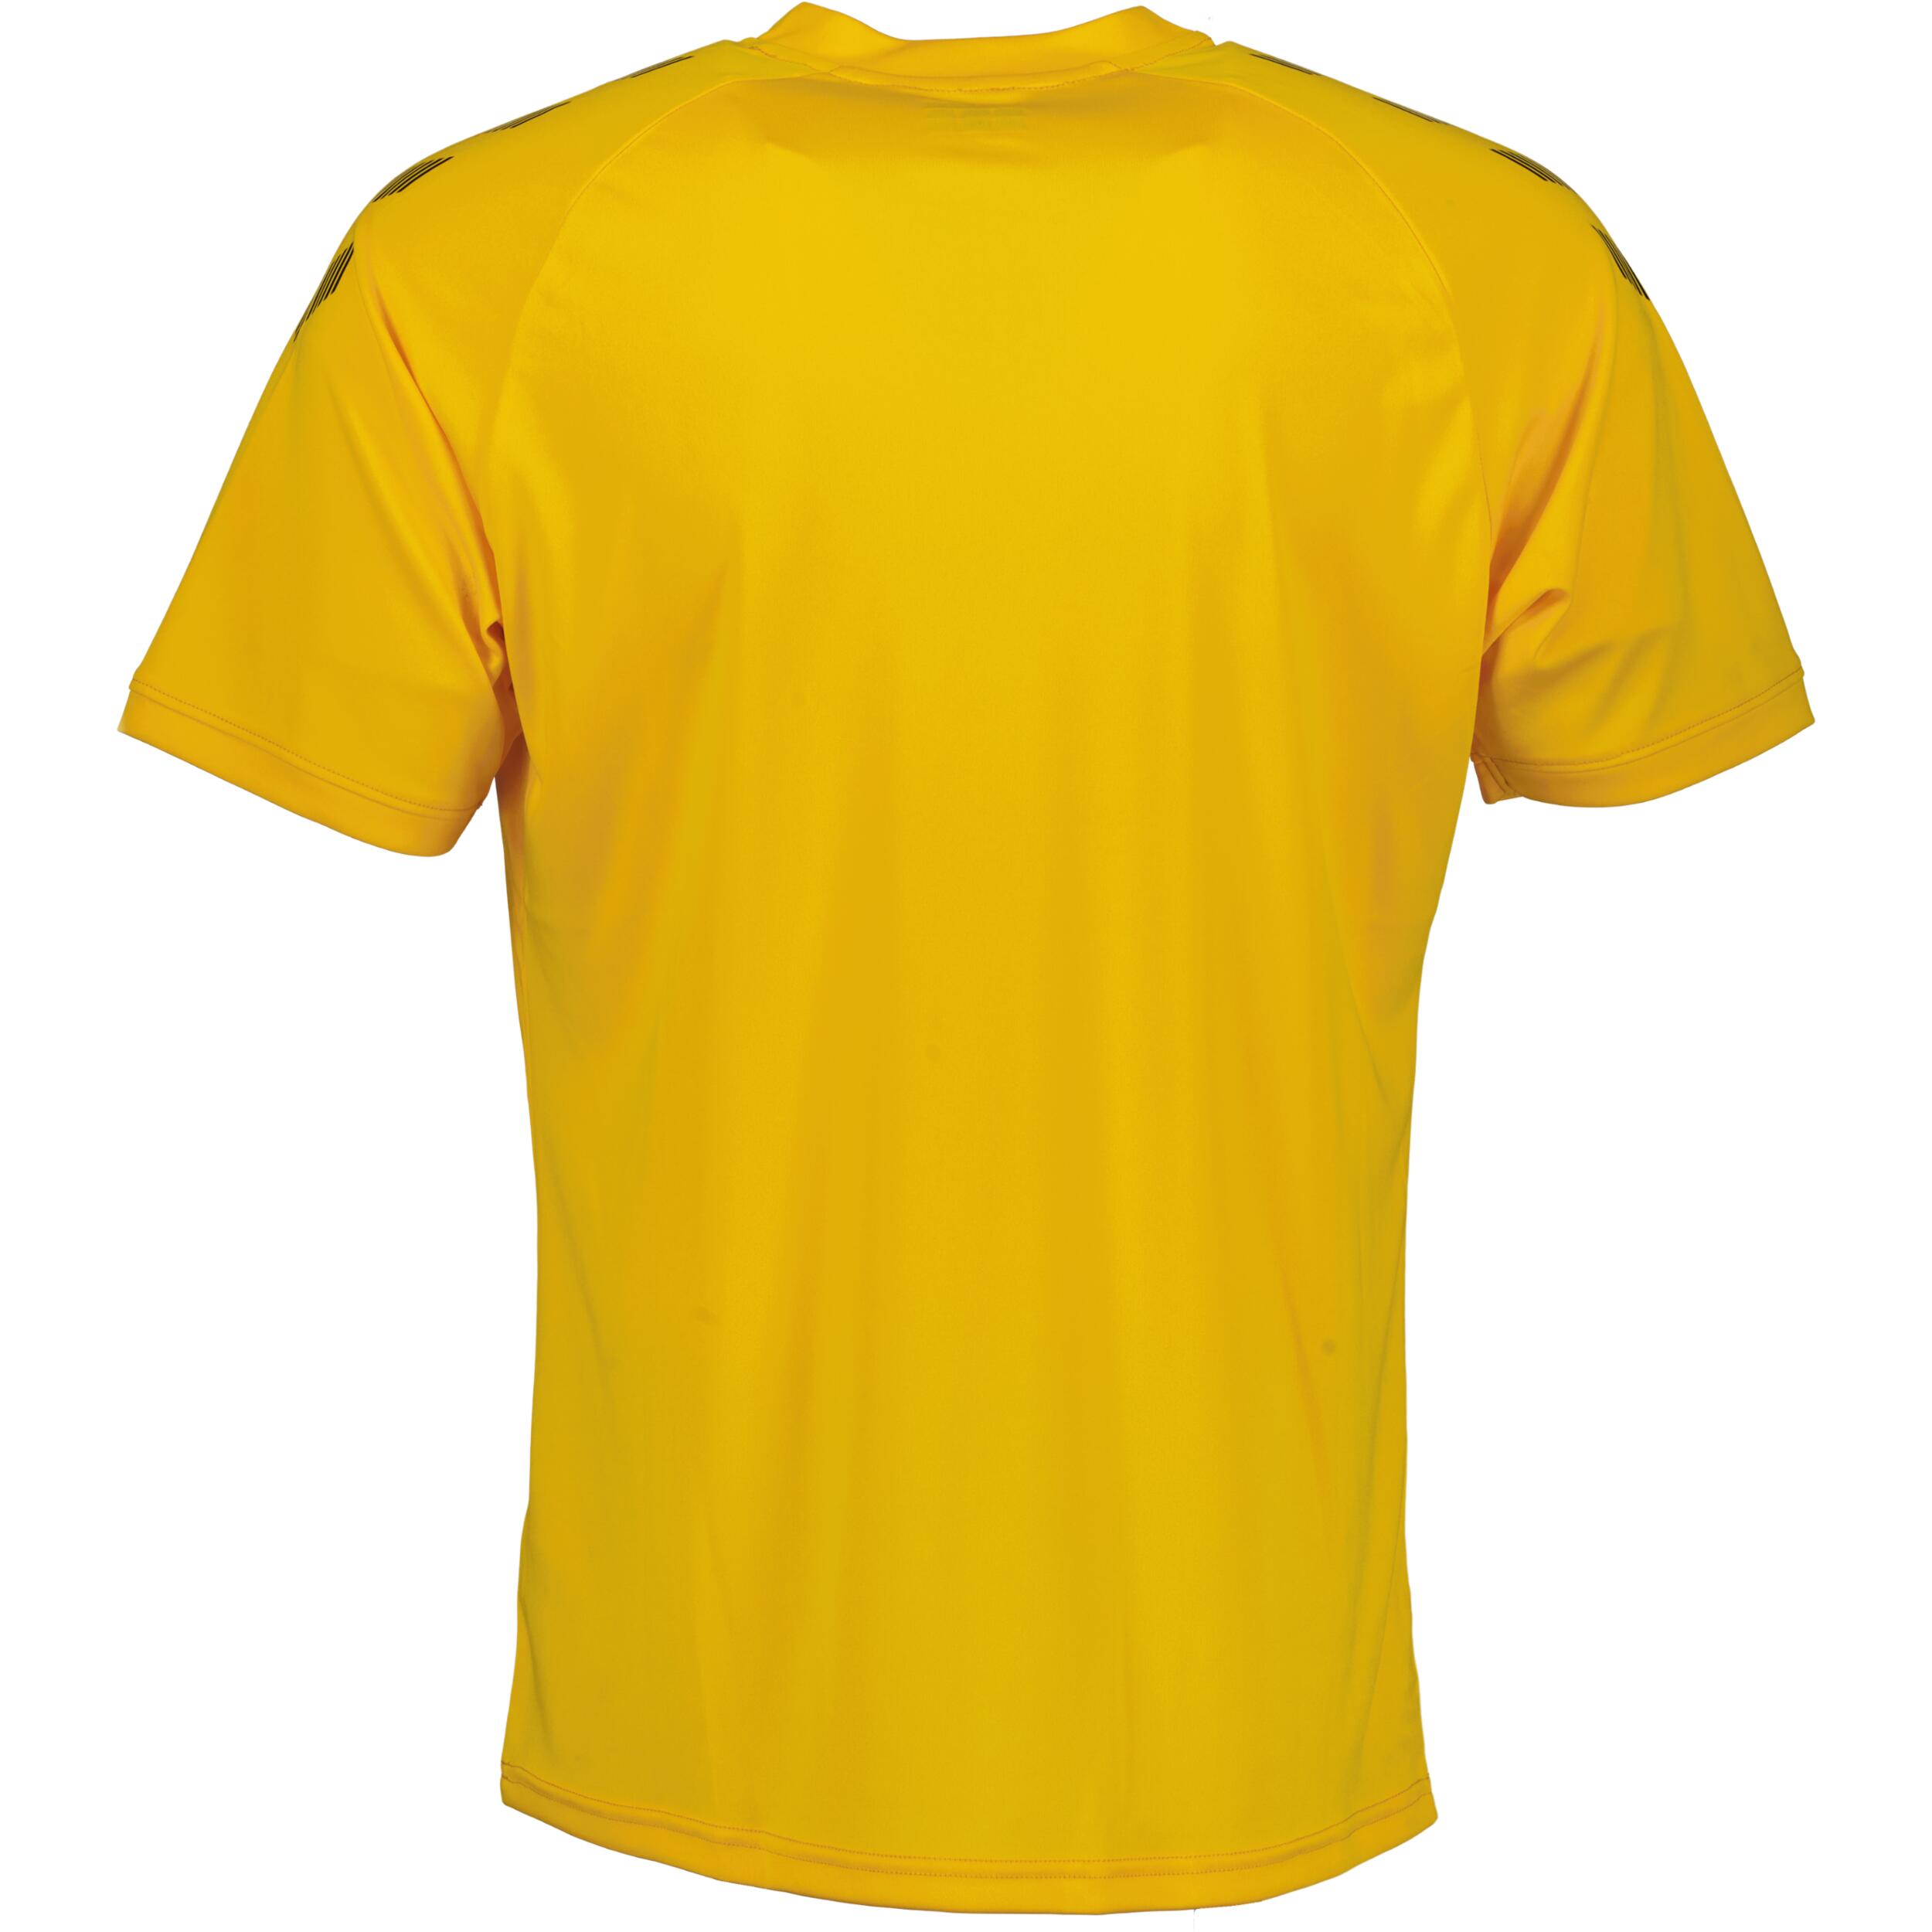 Poly jersey for kids, great for football, in sports yellow 2/3